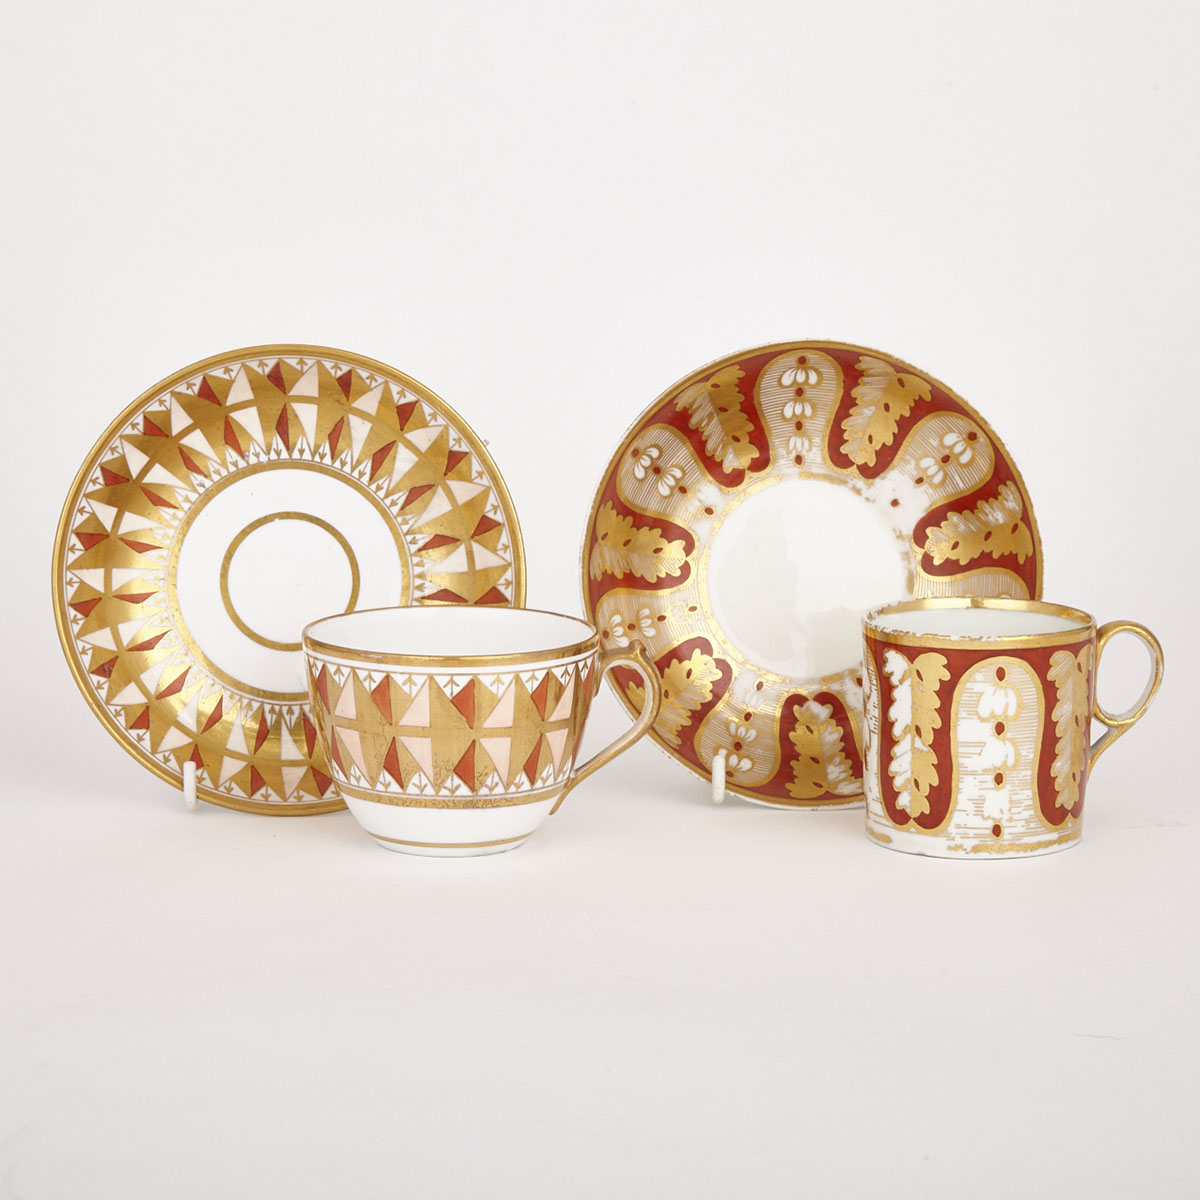 Two English Porcelain Orange and Gilt Decorated Cups and Saucers, one Derby, early 19th century